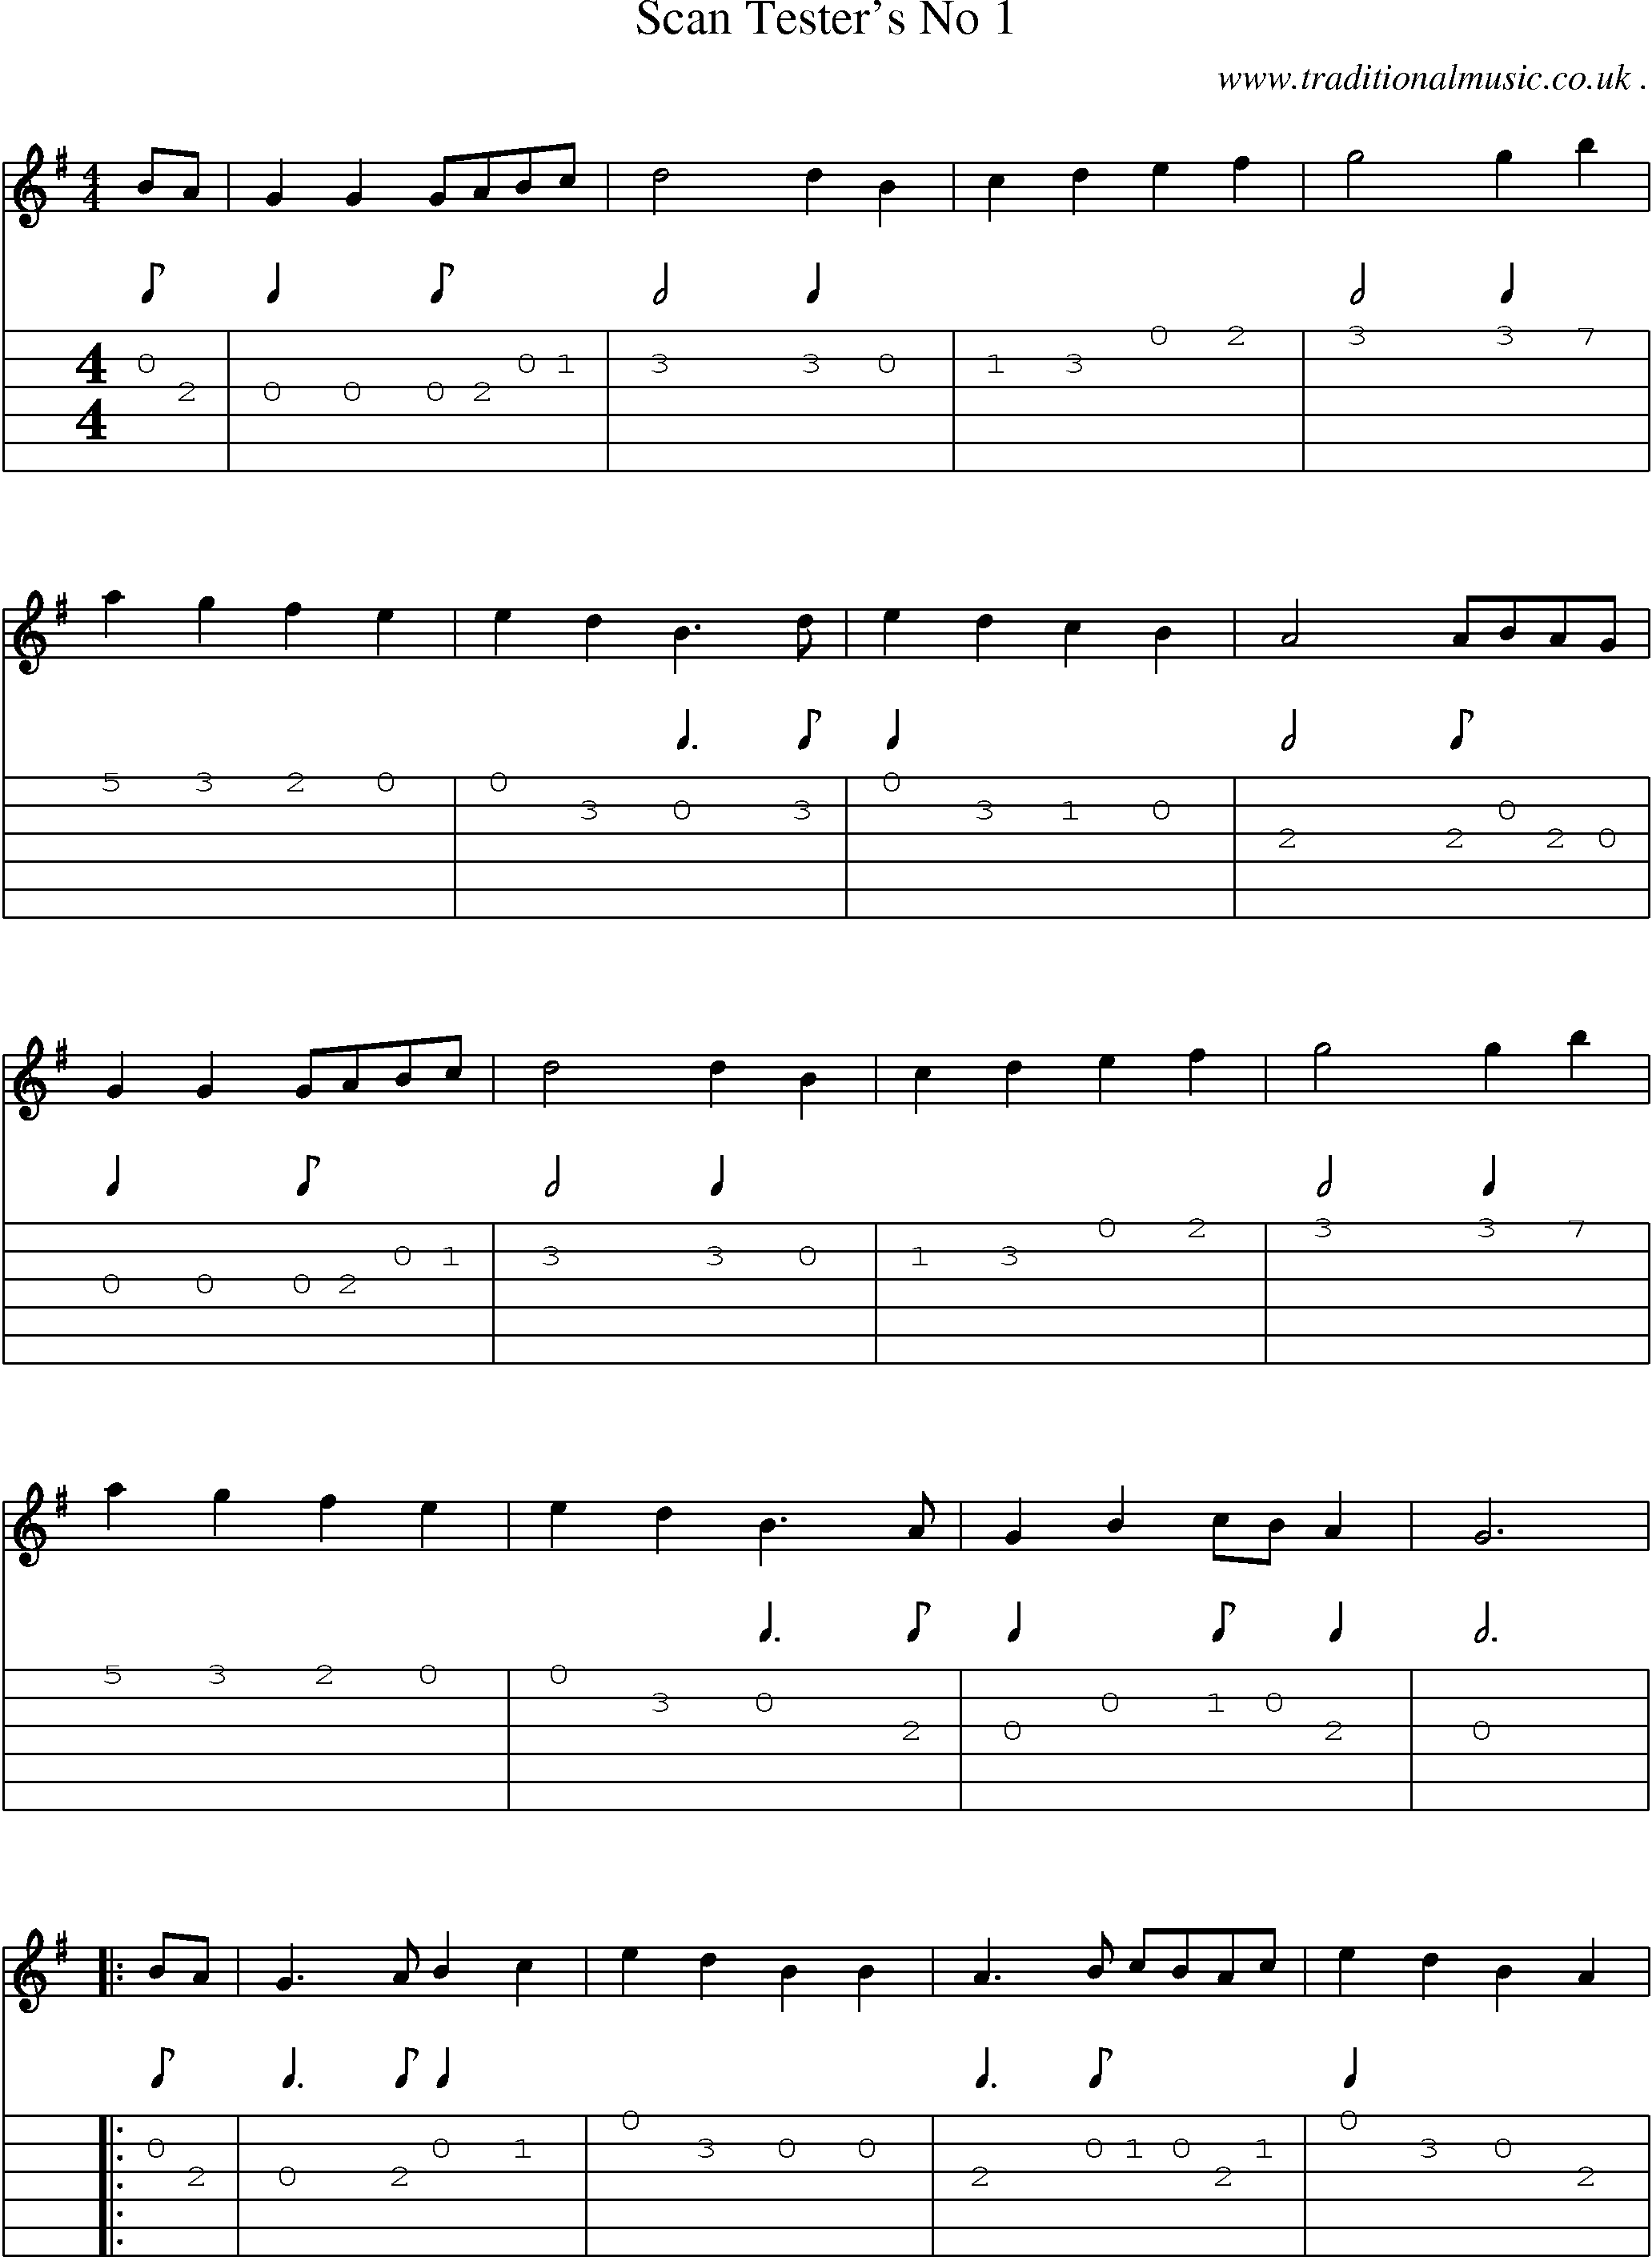 Sheet-Music and Guitar Tabs for Scan Testers No 1